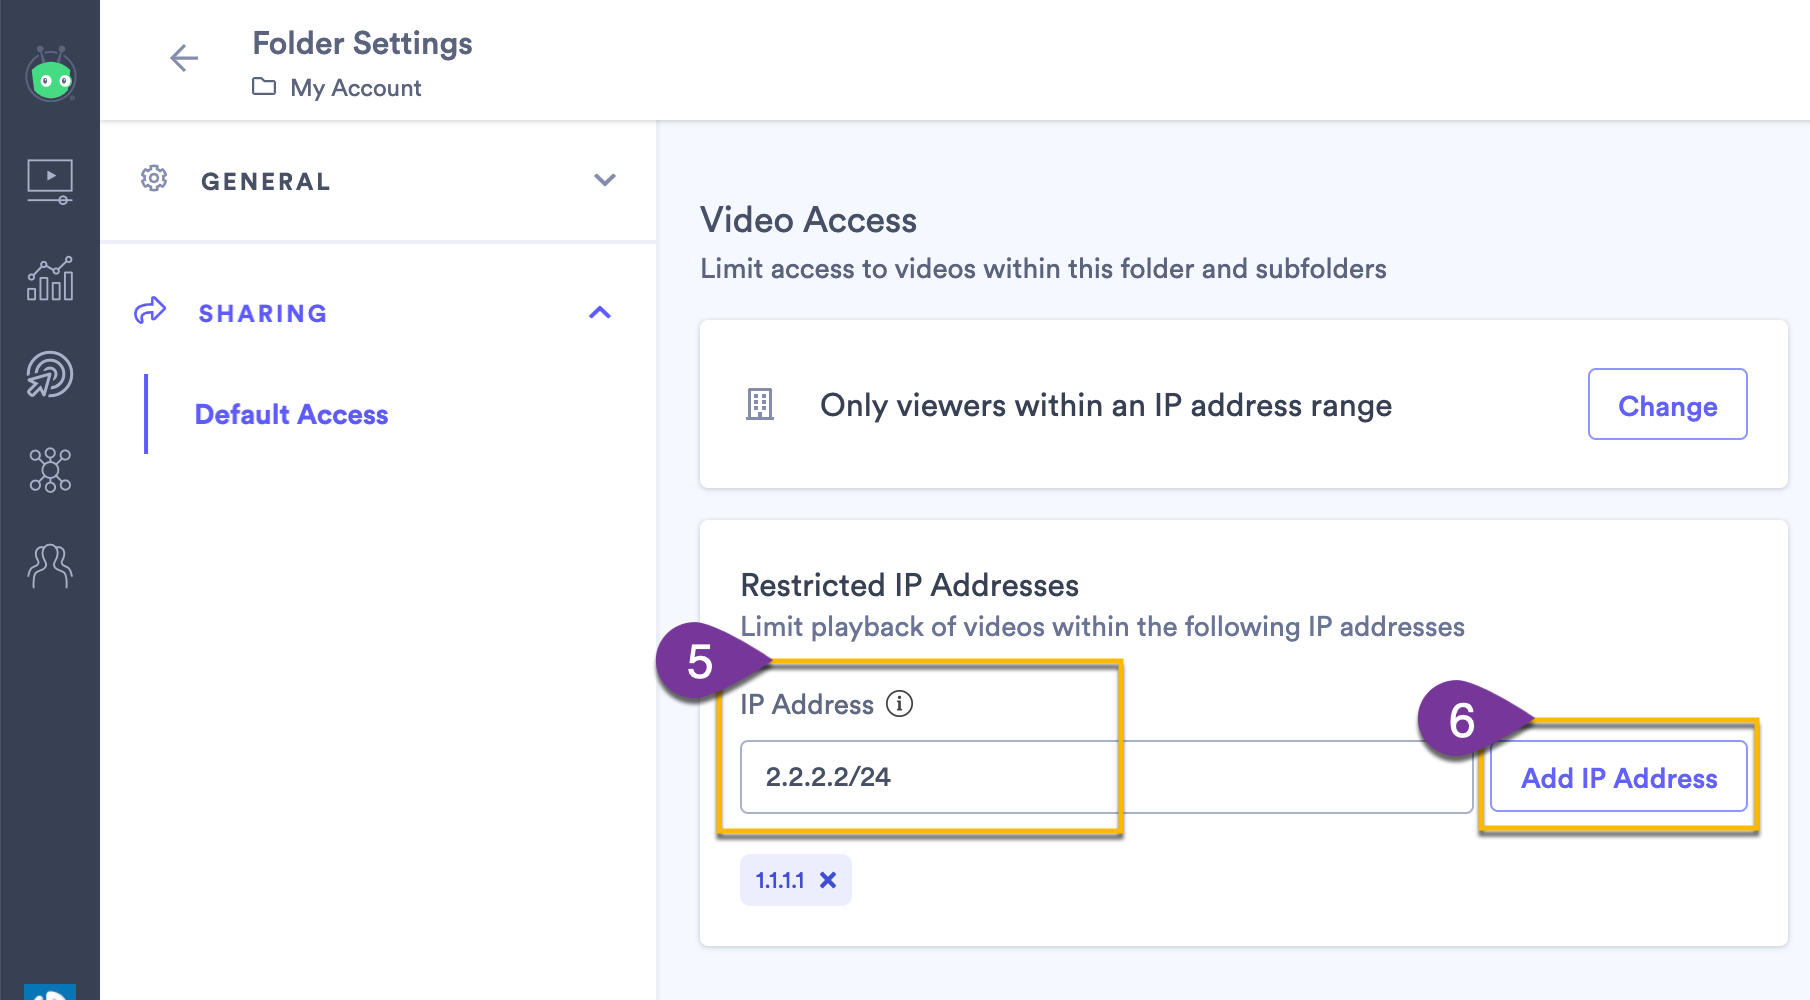 Adding the permitted IP address that viewers must connect to in order to view videos